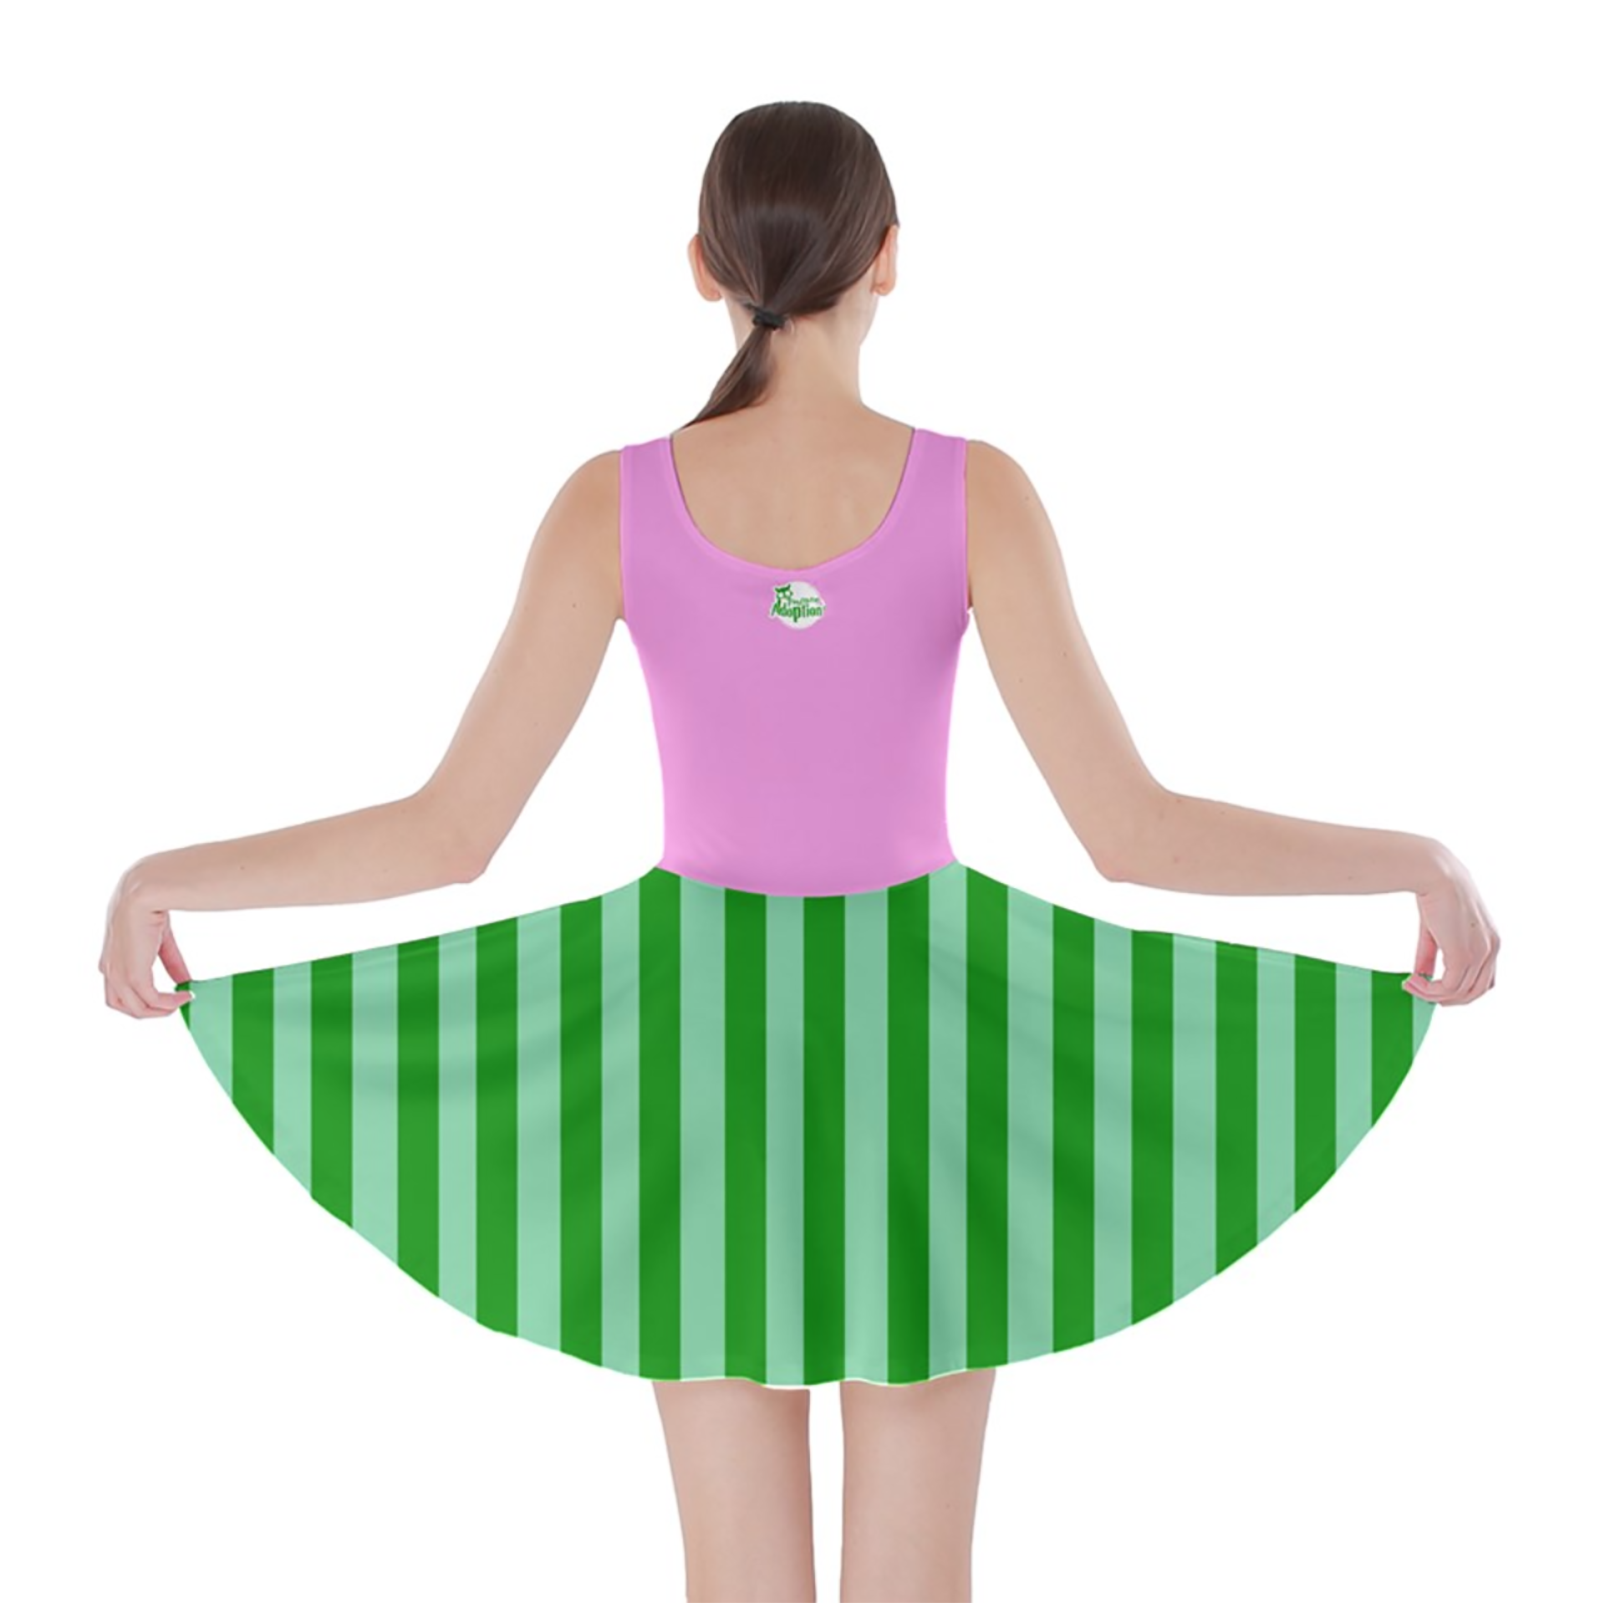 Candy Store Owl Skater Dress (green striped pattern)